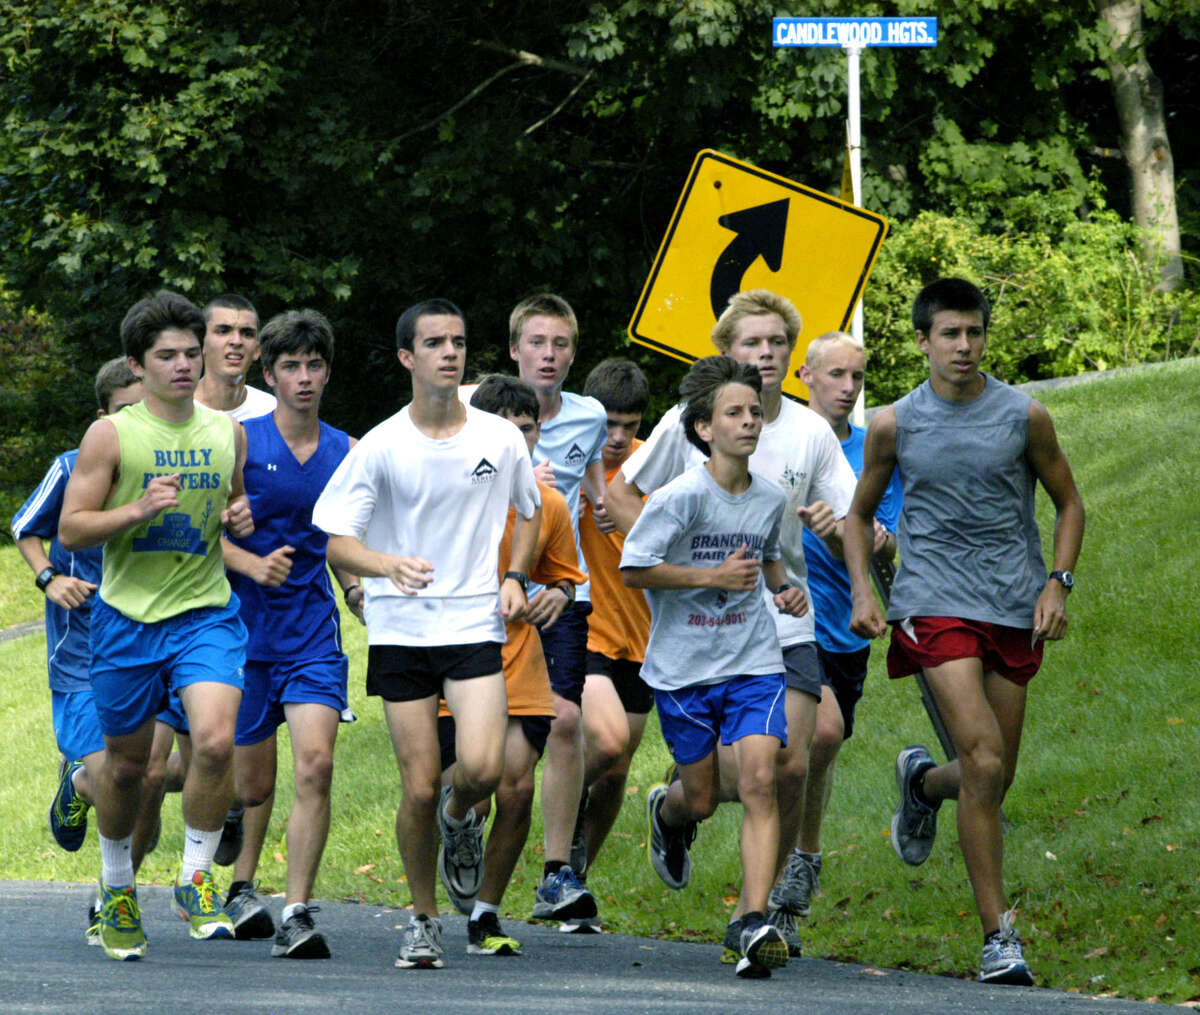 Ryan Clarke, right, and Greg Hansell set the pace as the lead pack of New Milford High School HIgh School's potentially strong boys' cross country team cruises Candlewood Lake Road during a pre-seasonm workout. September 2012